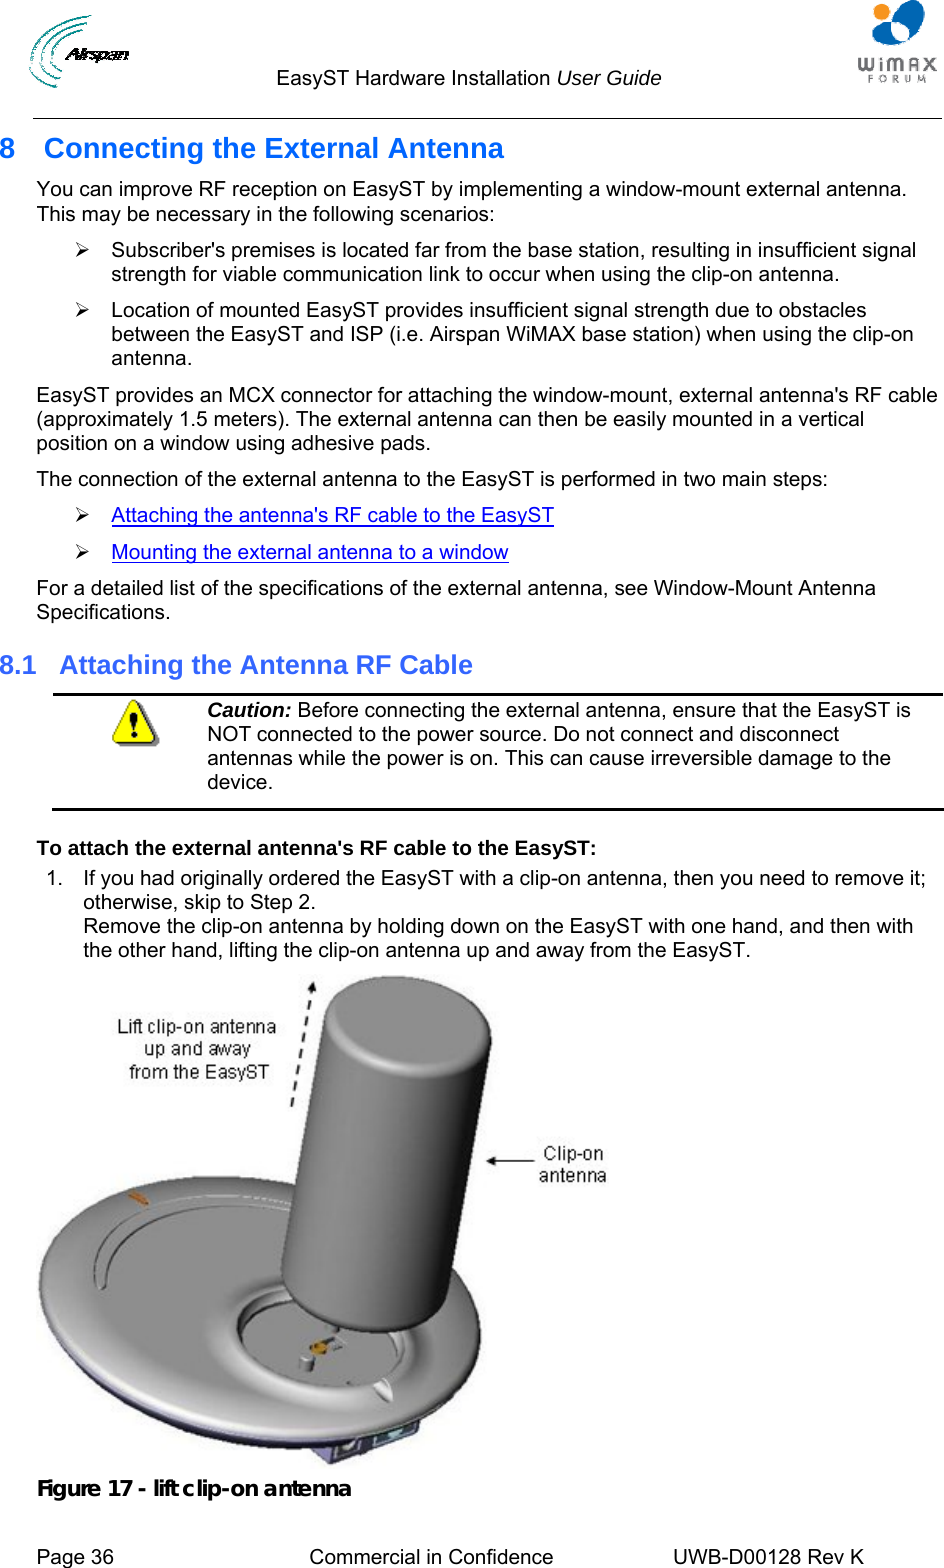                                  EasyST Hardware Installation User Guide     Page 36  Commercial in Confidence  UWB-D00128 Rev K   8  Connecting the External Antenna You can improve RF reception on EasyST by implementing a window-mount external antenna. This may be necessary in the following scenarios: ¾  Subscriber&apos;s premises is located far from the base station, resulting in insufficient signal strength for viable communication link to occur when using the clip-on antenna. ¾  Location of mounted EasyST provides insufficient signal strength due to obstacles between the EasyST and ISP (i.e. Airspan WiMAX base station) when using the clip-on antenna. EasyST provides an MCX connector for attaching the window-mount, external antenna&apos;s RF cable (approximately 1.5 meters). The external antenna can then be easily mounted in a vertical position on a window using adhesive pads. The connection of the external antenna to the EasyST is performed in two main steps: ¾ Attaching the antenna&apos;s RF cable to the EasyST ¾ Mounting the external antenna to a window For a detailed list of the specifications of the external antenna, see Window-Mount Antenna Specifications. 8.1  Attaching the Antenna RF Cable  Caution: Before connecting the external antenna, ensure that the EasyST is NOT connected to the power source. Do not connect and disconnect antennas while the power is on. This can cause irreversible damage to the device.  To attach the external antenna&apos;s RF cable to the EasyST: 1.  If you had originally ordered the EasyST with a clip-on antenna, then you need to remove it; otherwise, skip to Step 2. Remove the clip-on antenna by holding down on the EasyST with one hand, and then with the other hand, lifting the clip-on antenna up and away from the EasyST.   Figure 17 - lift clip-on antenna 